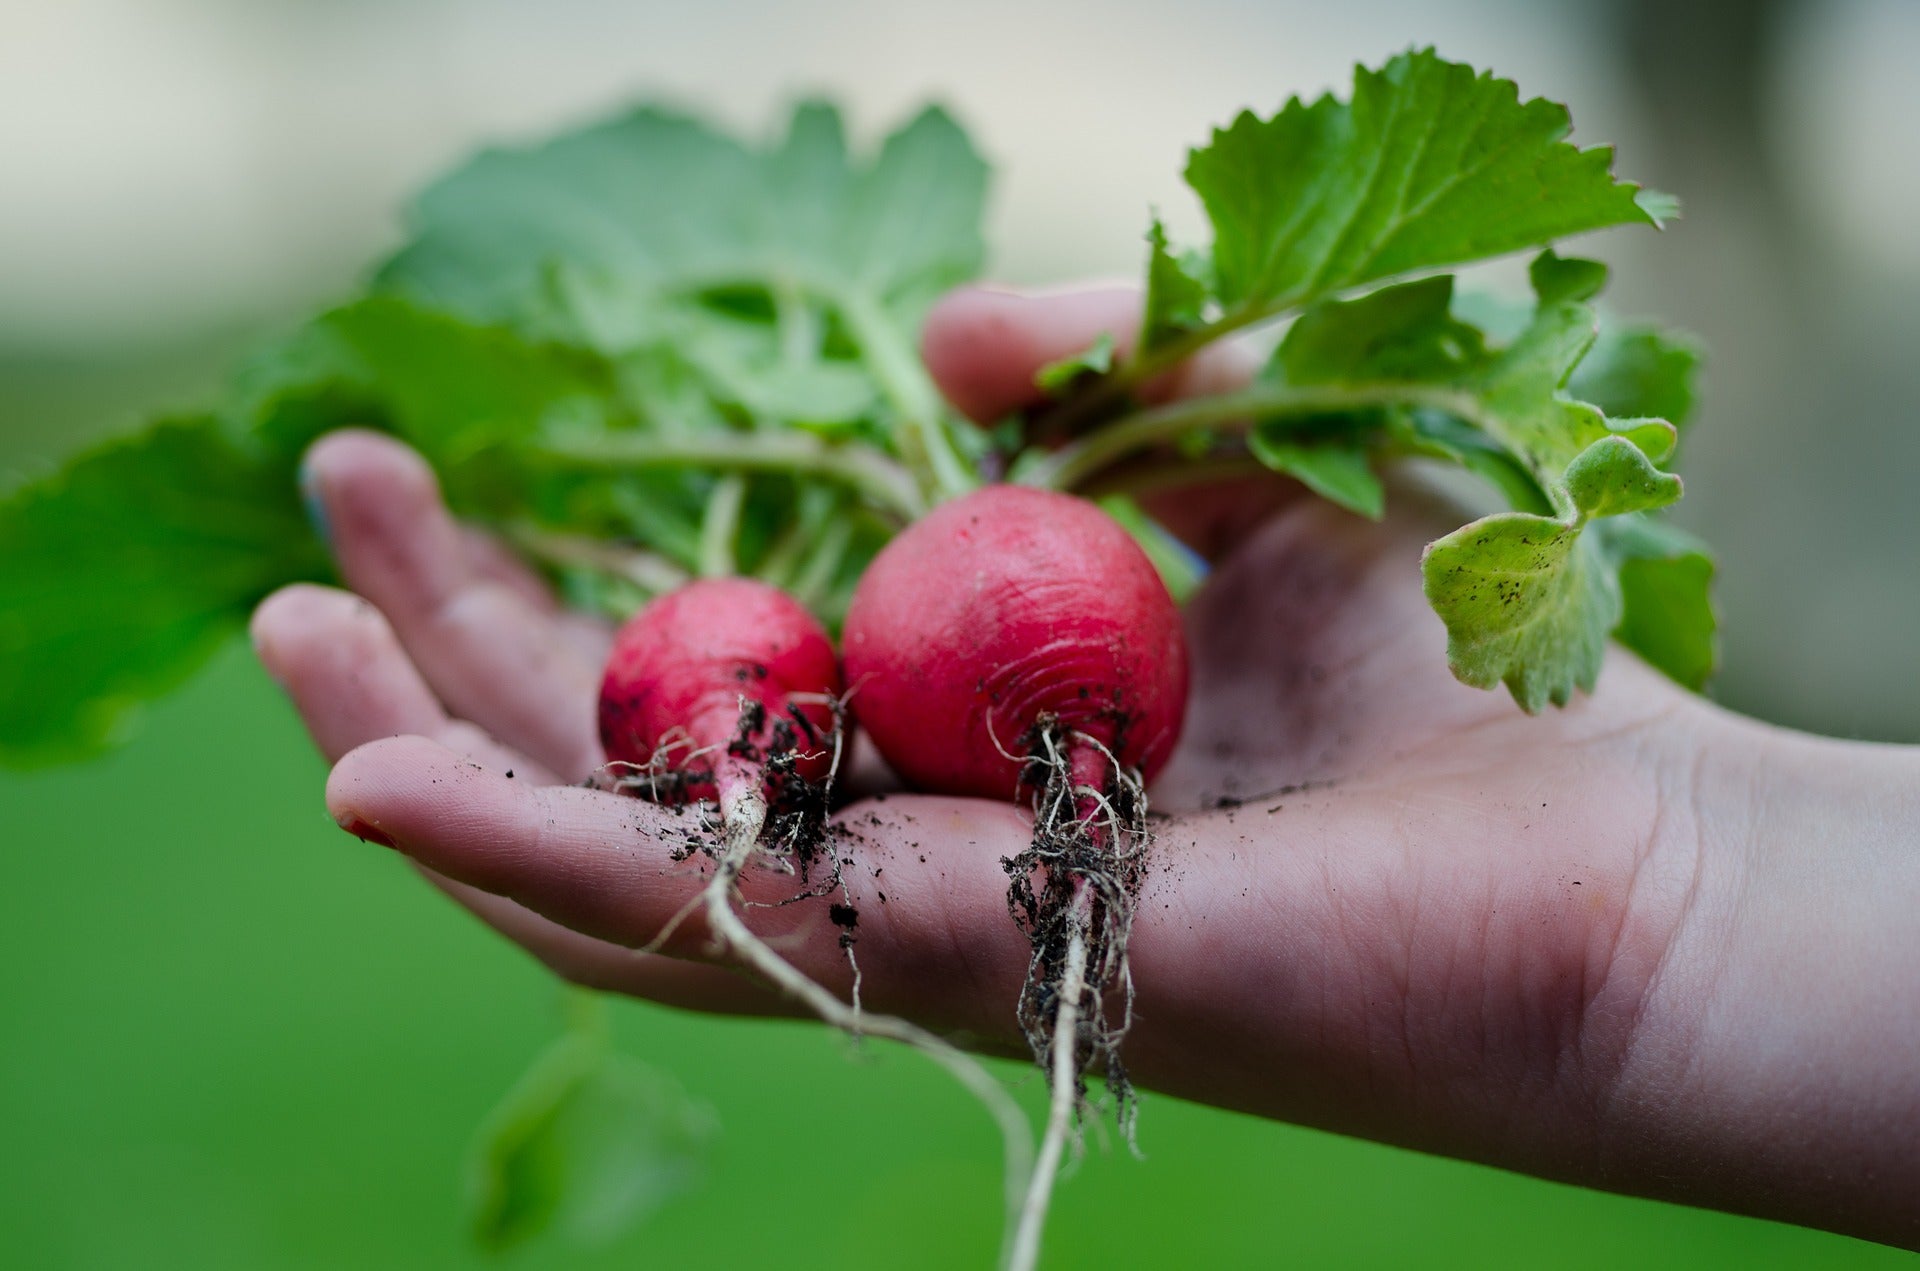 Growing radishes in home gardens